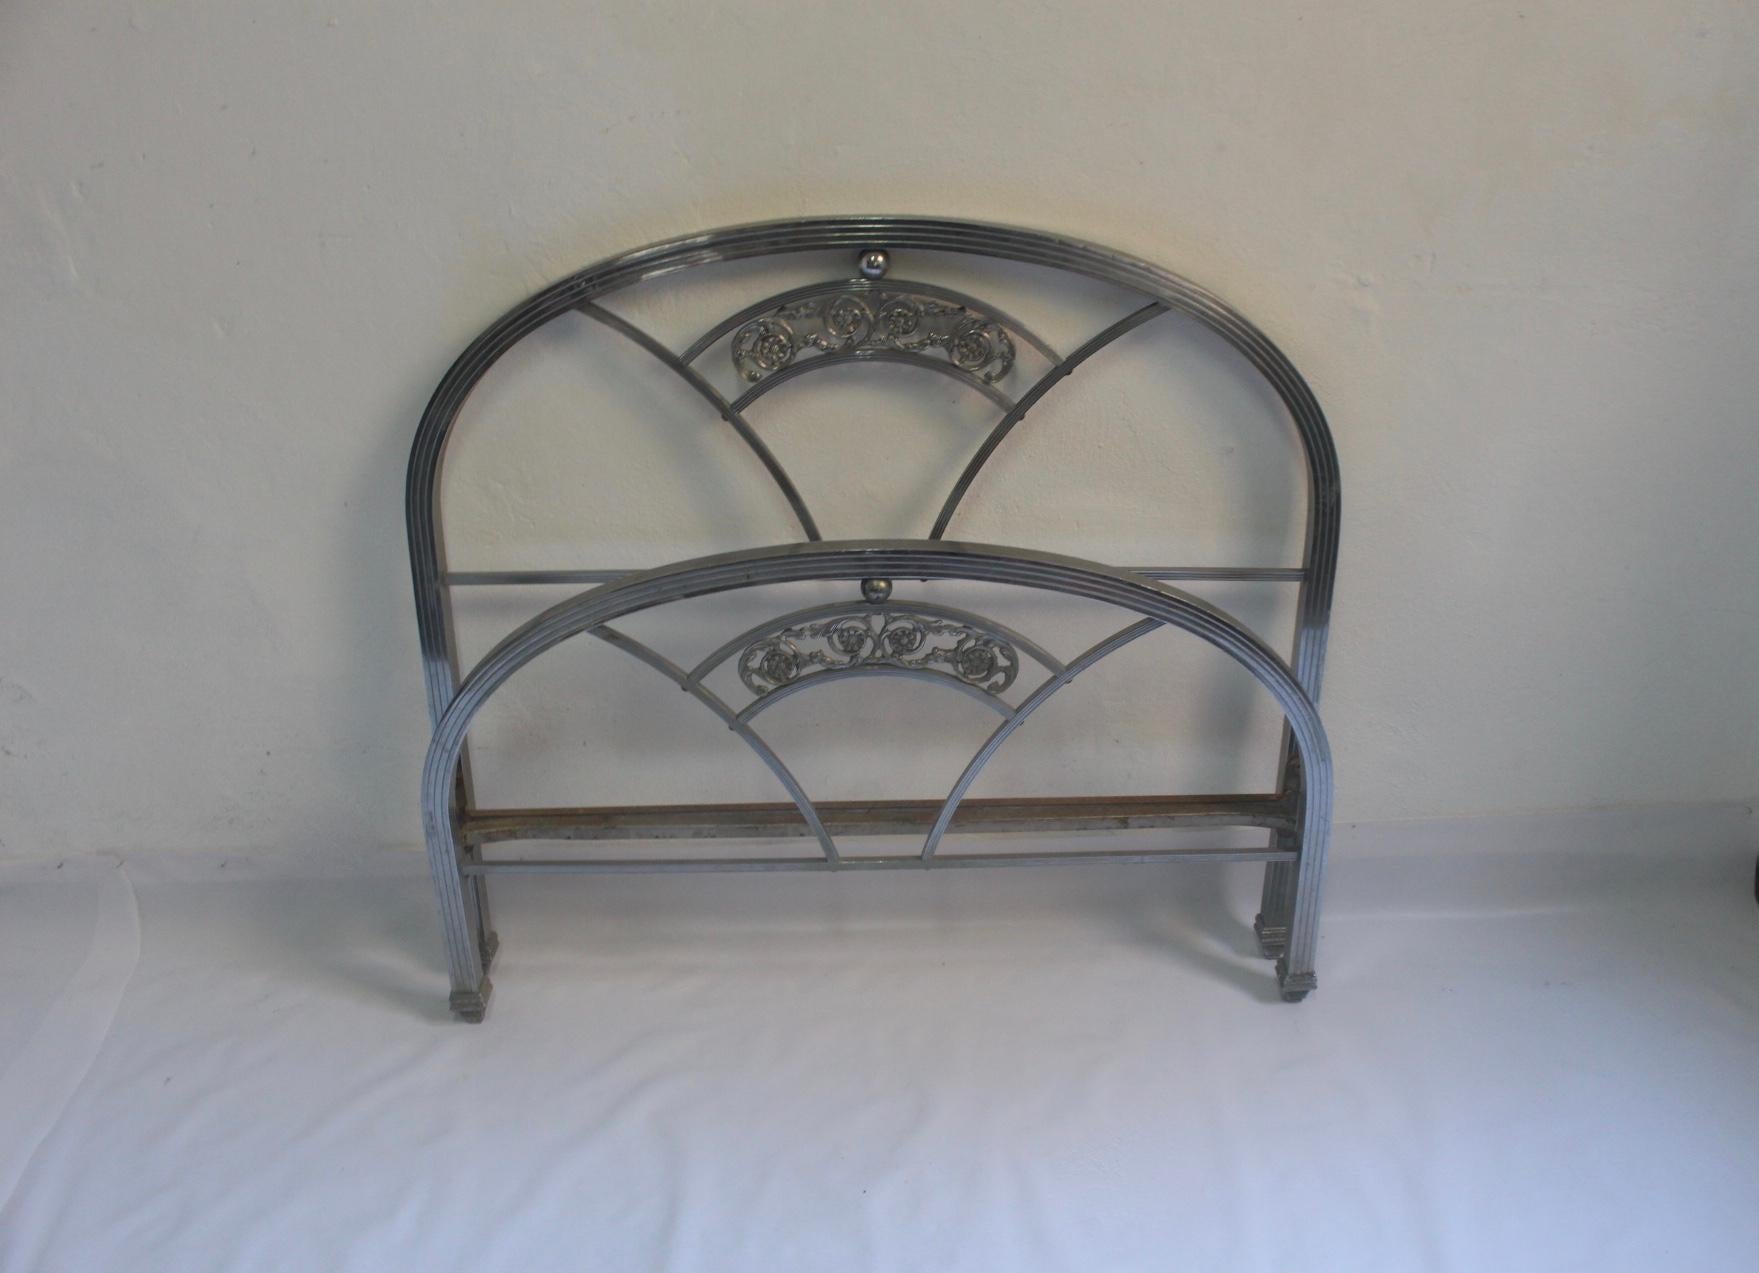 Art Deco nickeled brass bed, headboard and foot part, Spain, circa 1930s.
Fair condition. Note that both mattress support bars featuring oxide wear can be removed if need it. 
Nickeled brass structures featuring visible wear, but without oxide